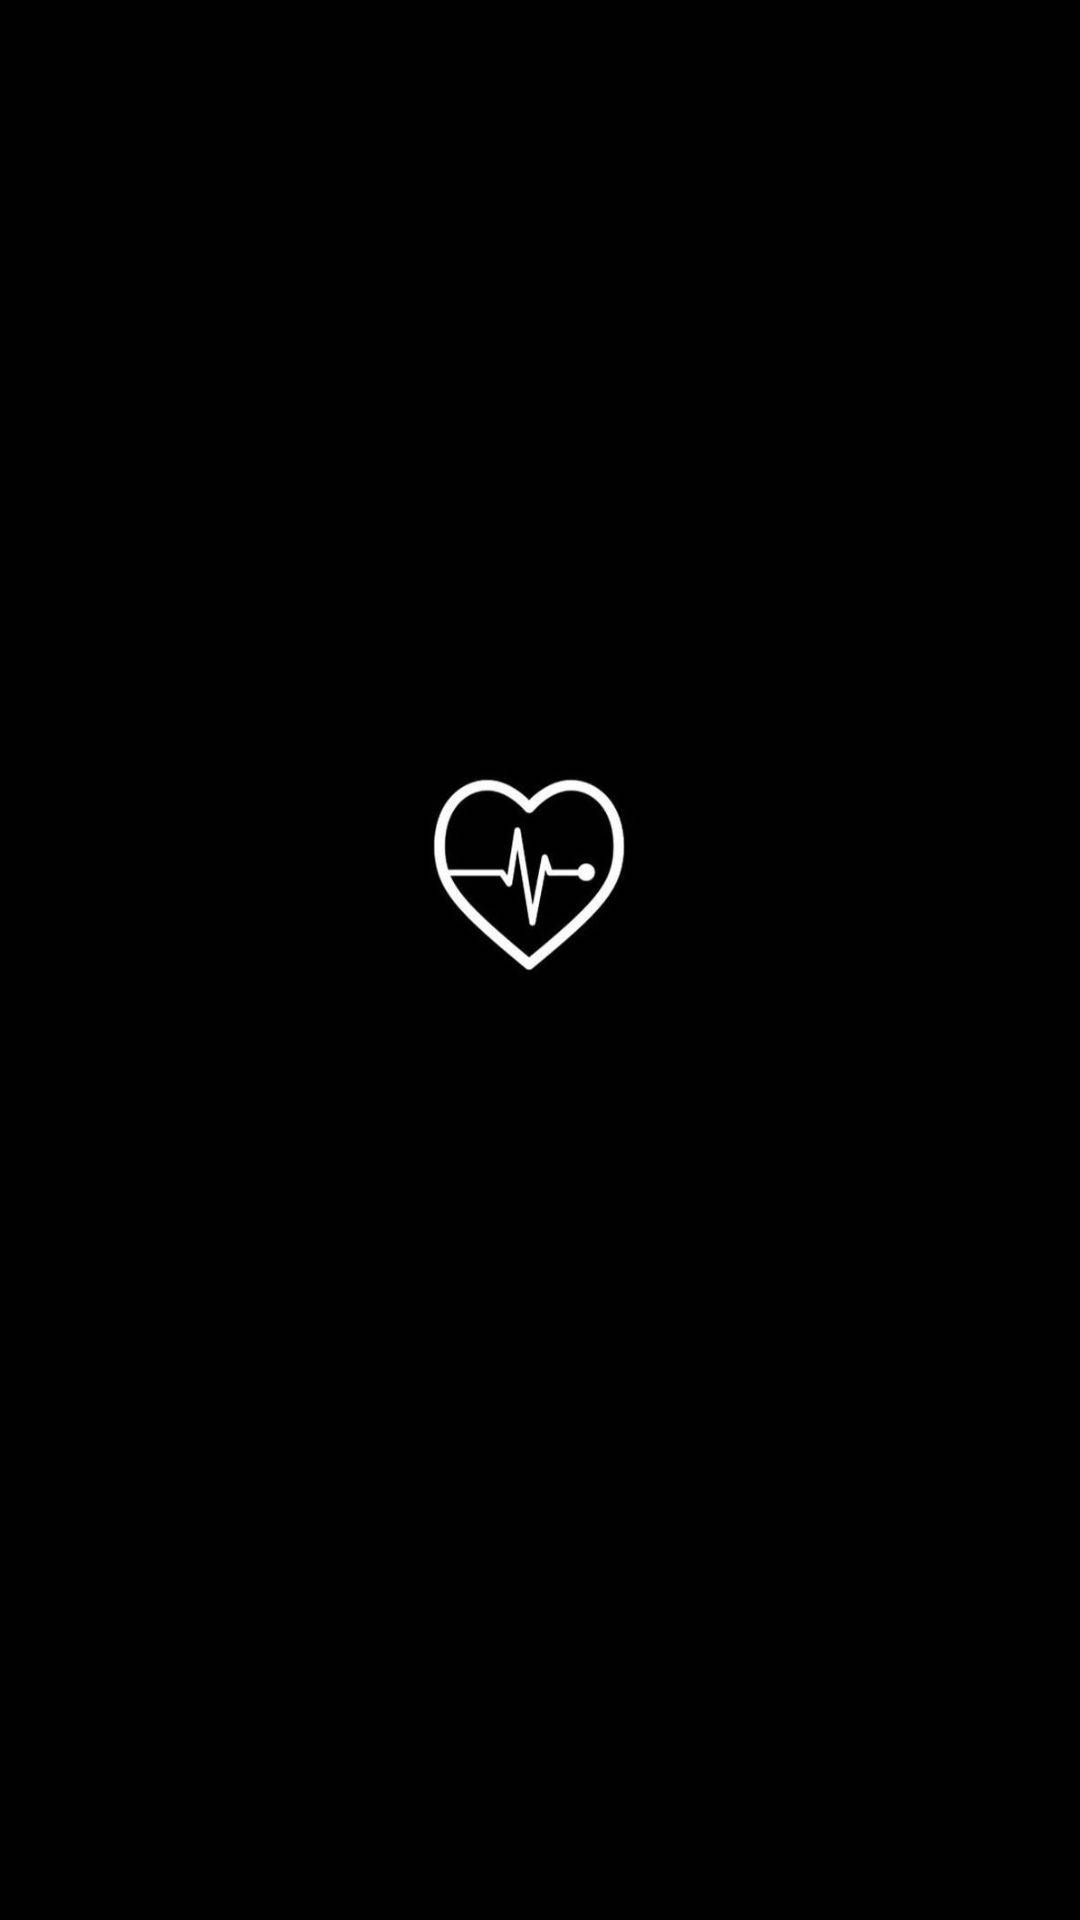 Black Heart 1080X1920 Wallpaper and Background Image